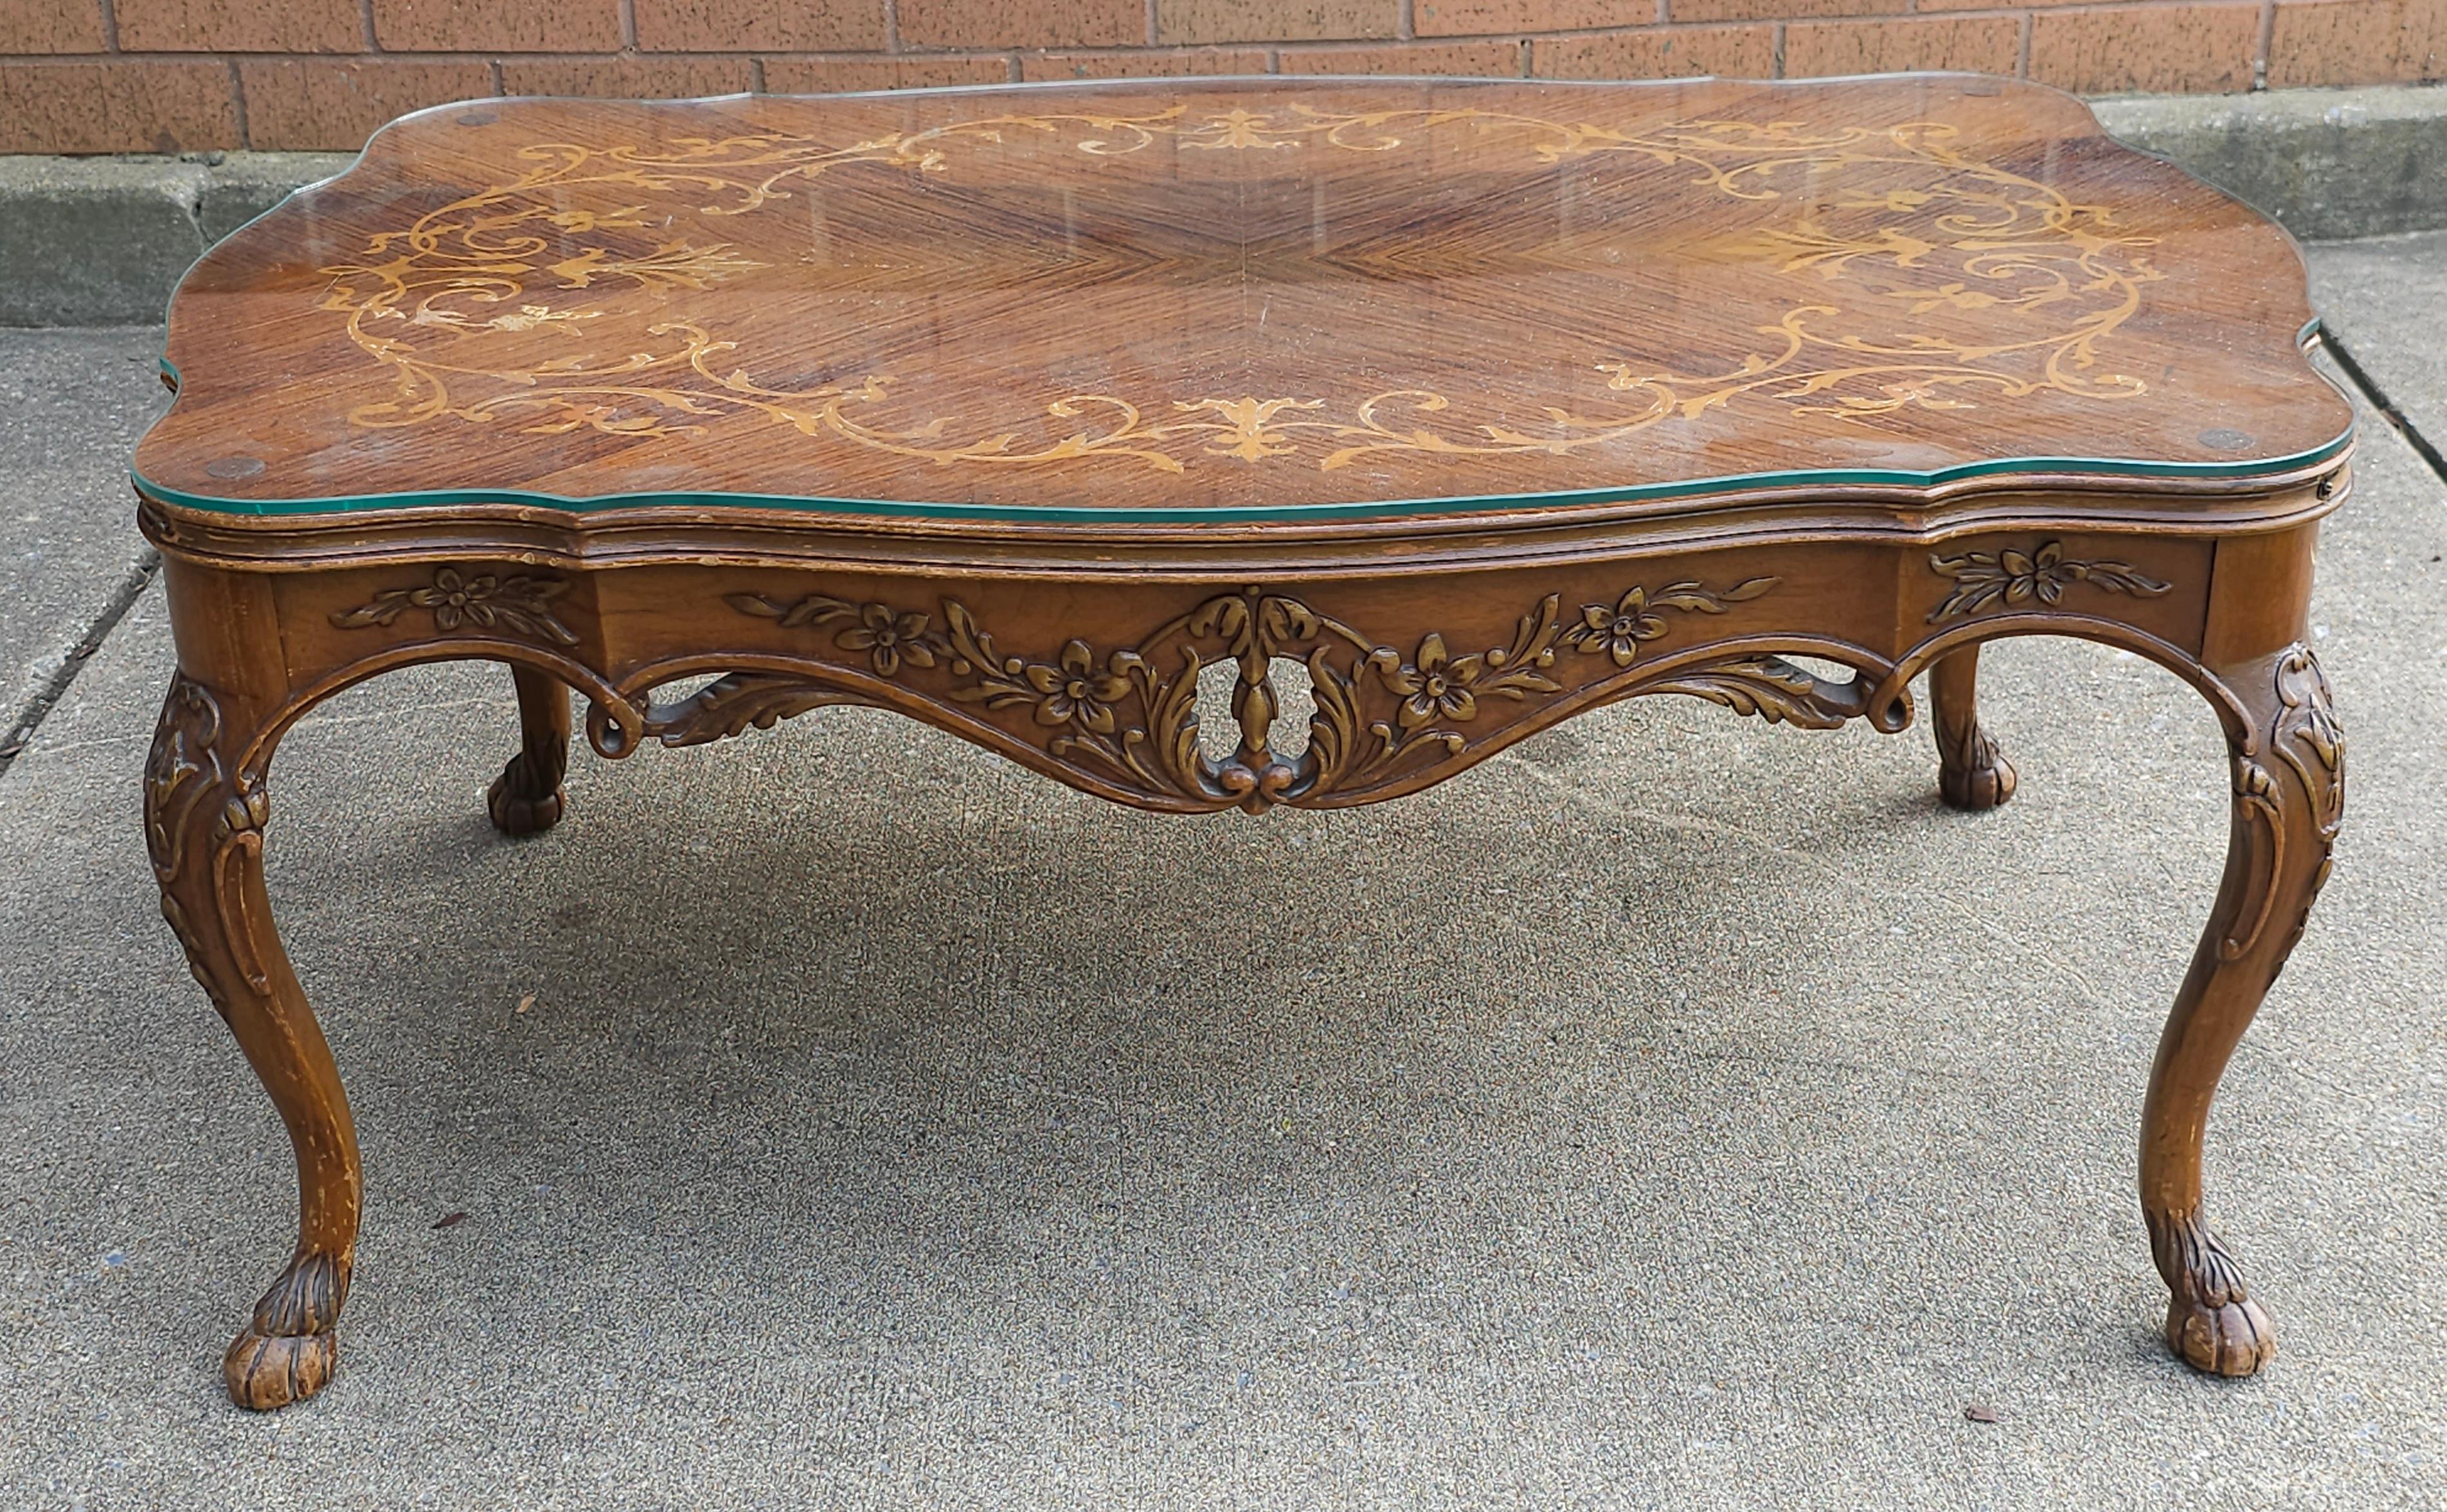 Carved Edwardian Rococo Style Satinwood Marquetry Cocktail Table with Protective Glass  For Sale